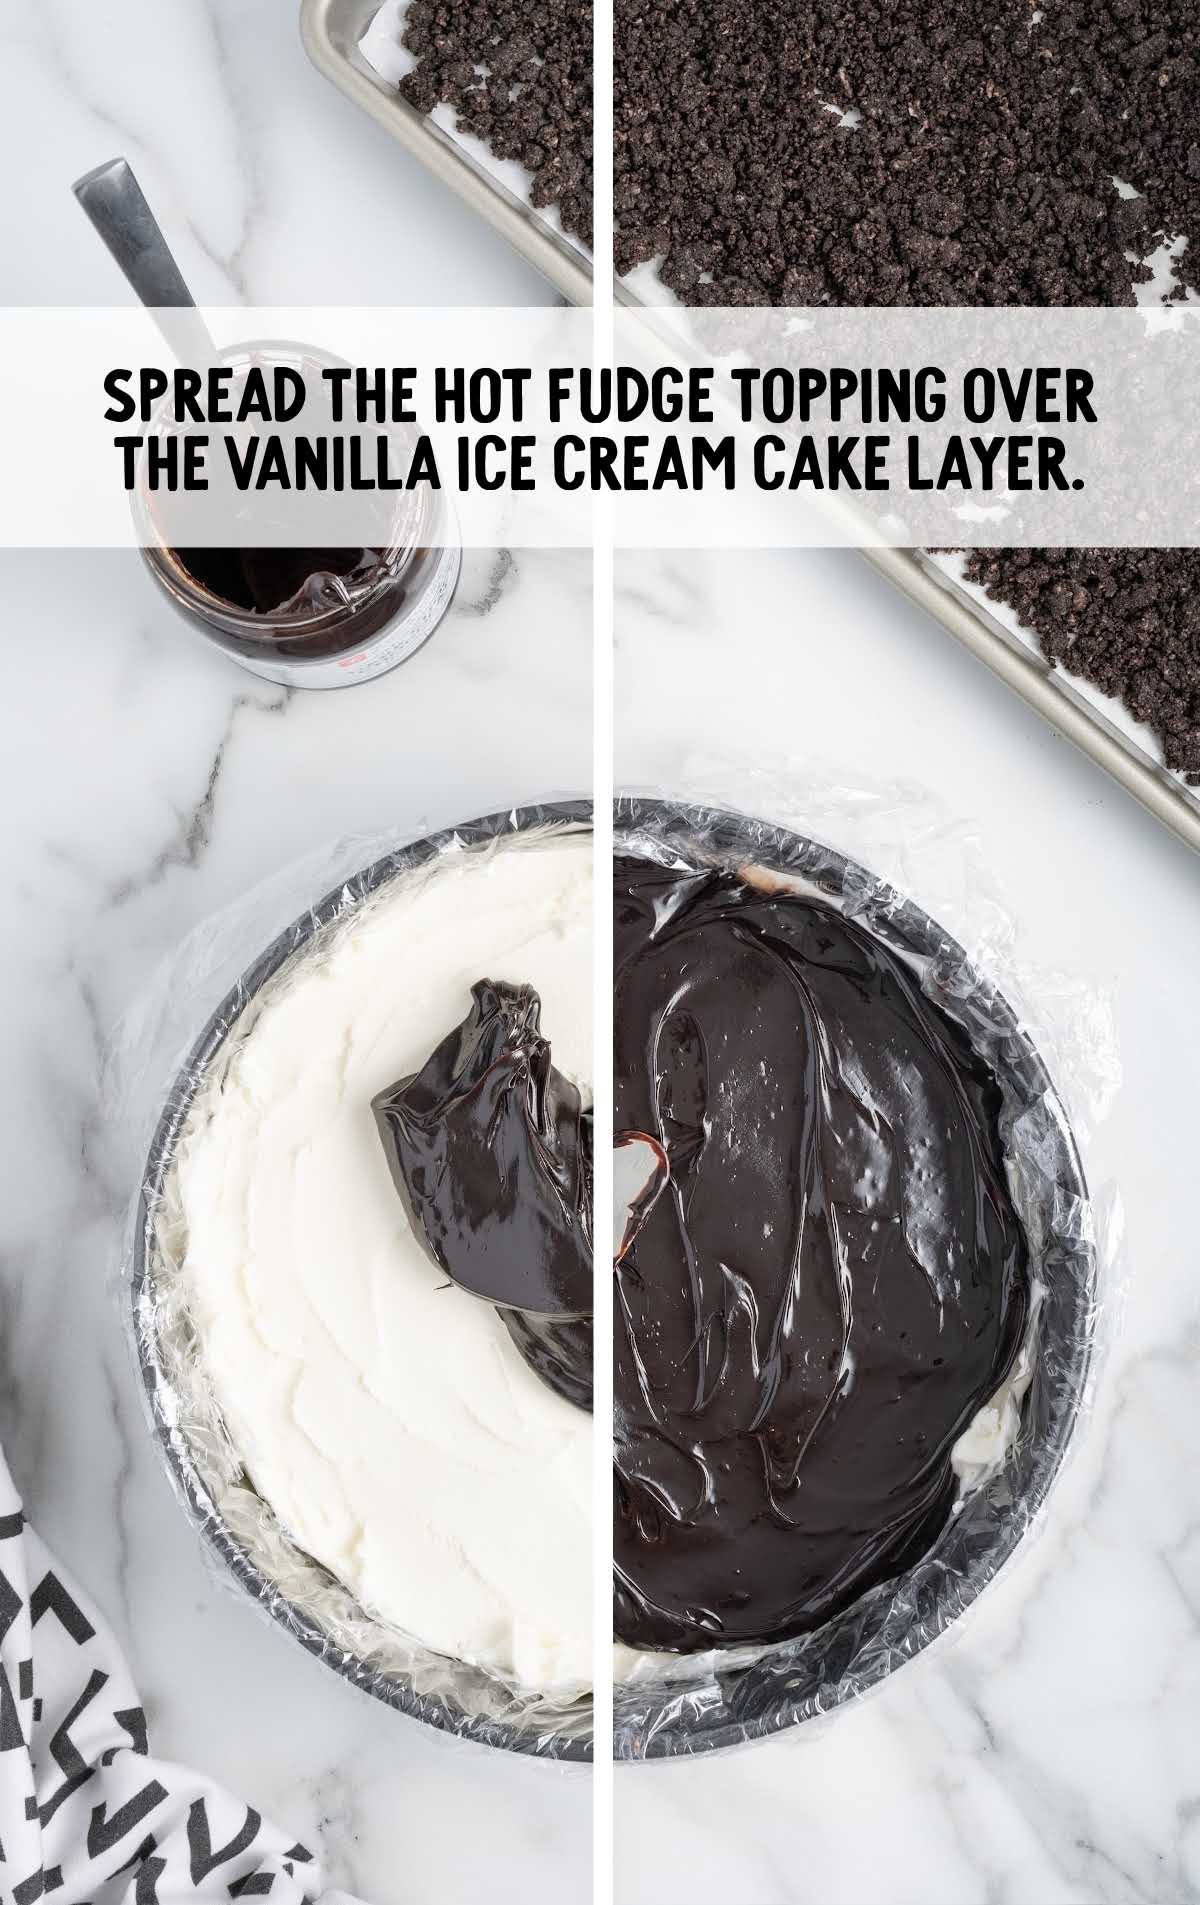 hot fudge topping spread over the ice cream layer